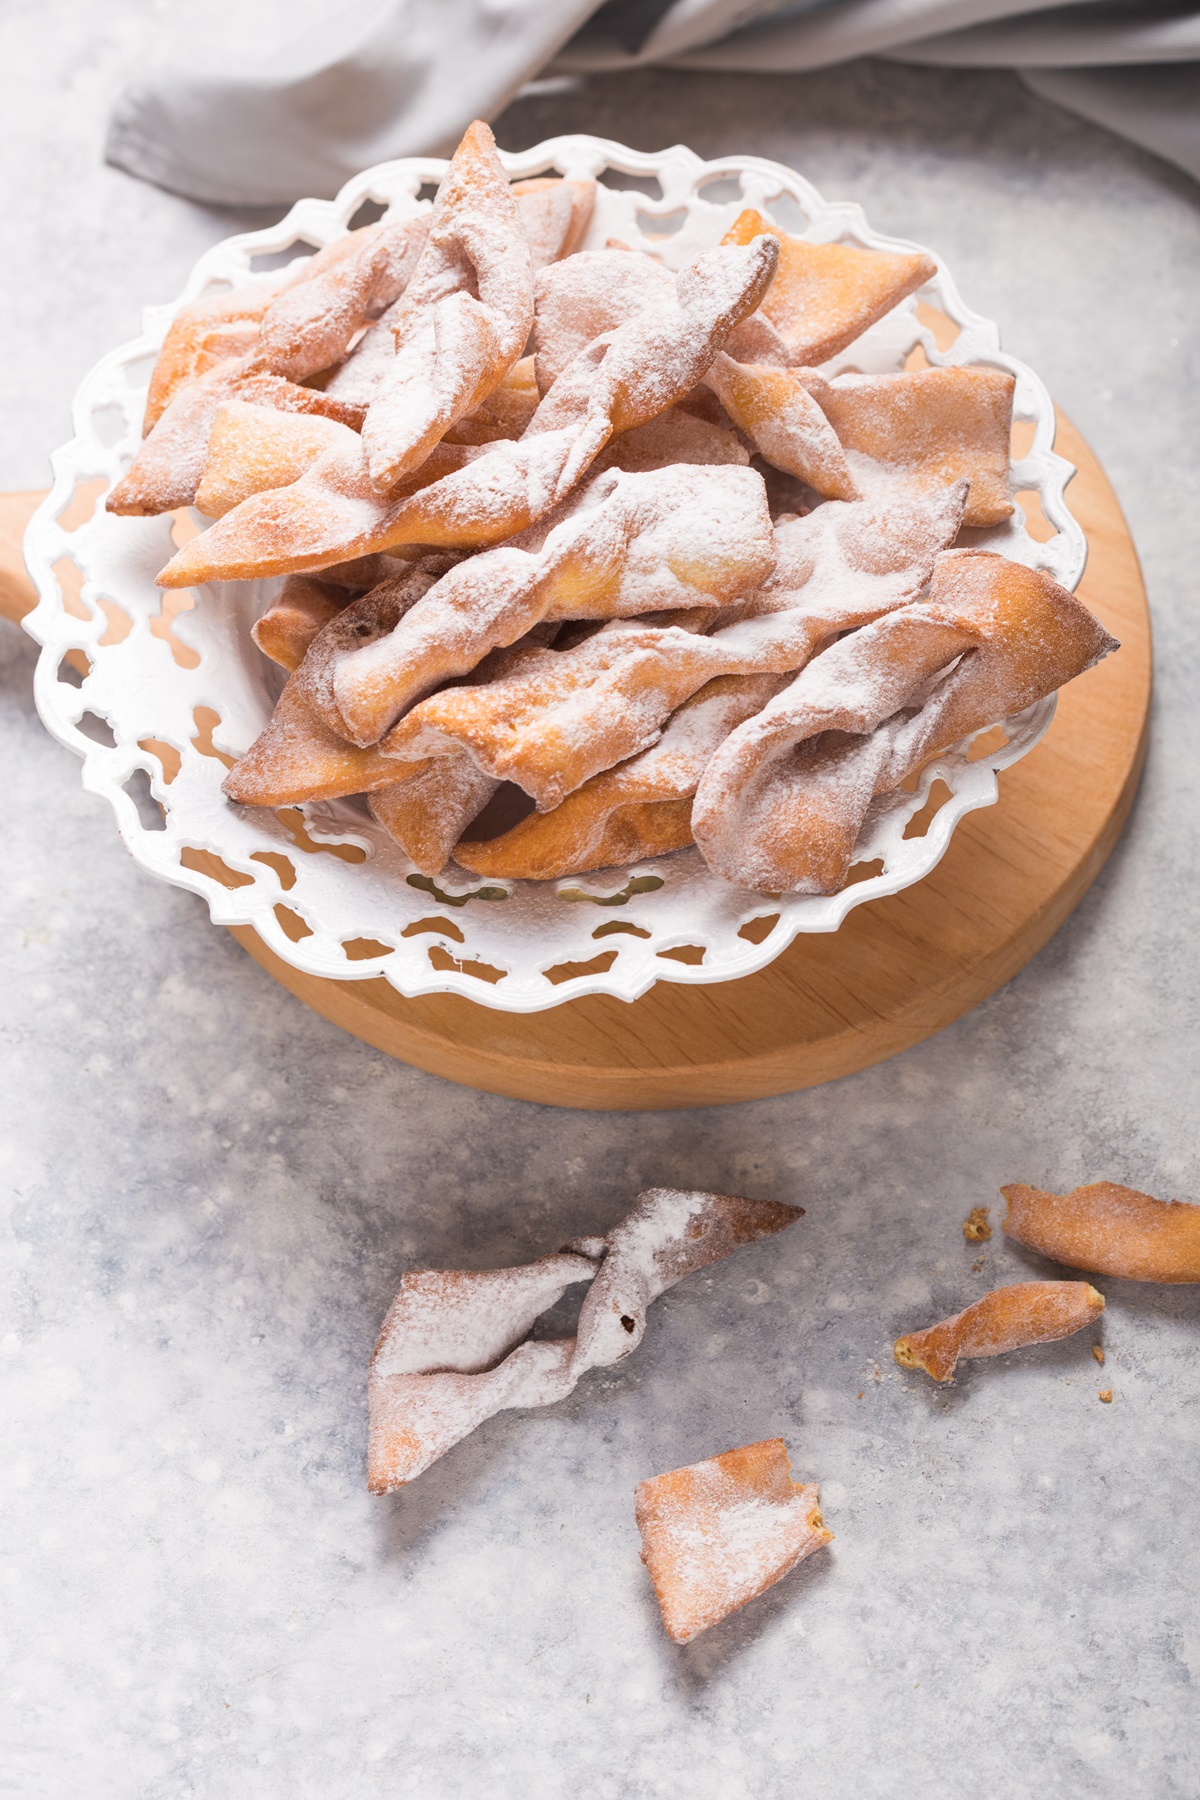 Angel wing doughnuts recipe - a delicacy reminiscent of childhood that will melt in your mouth